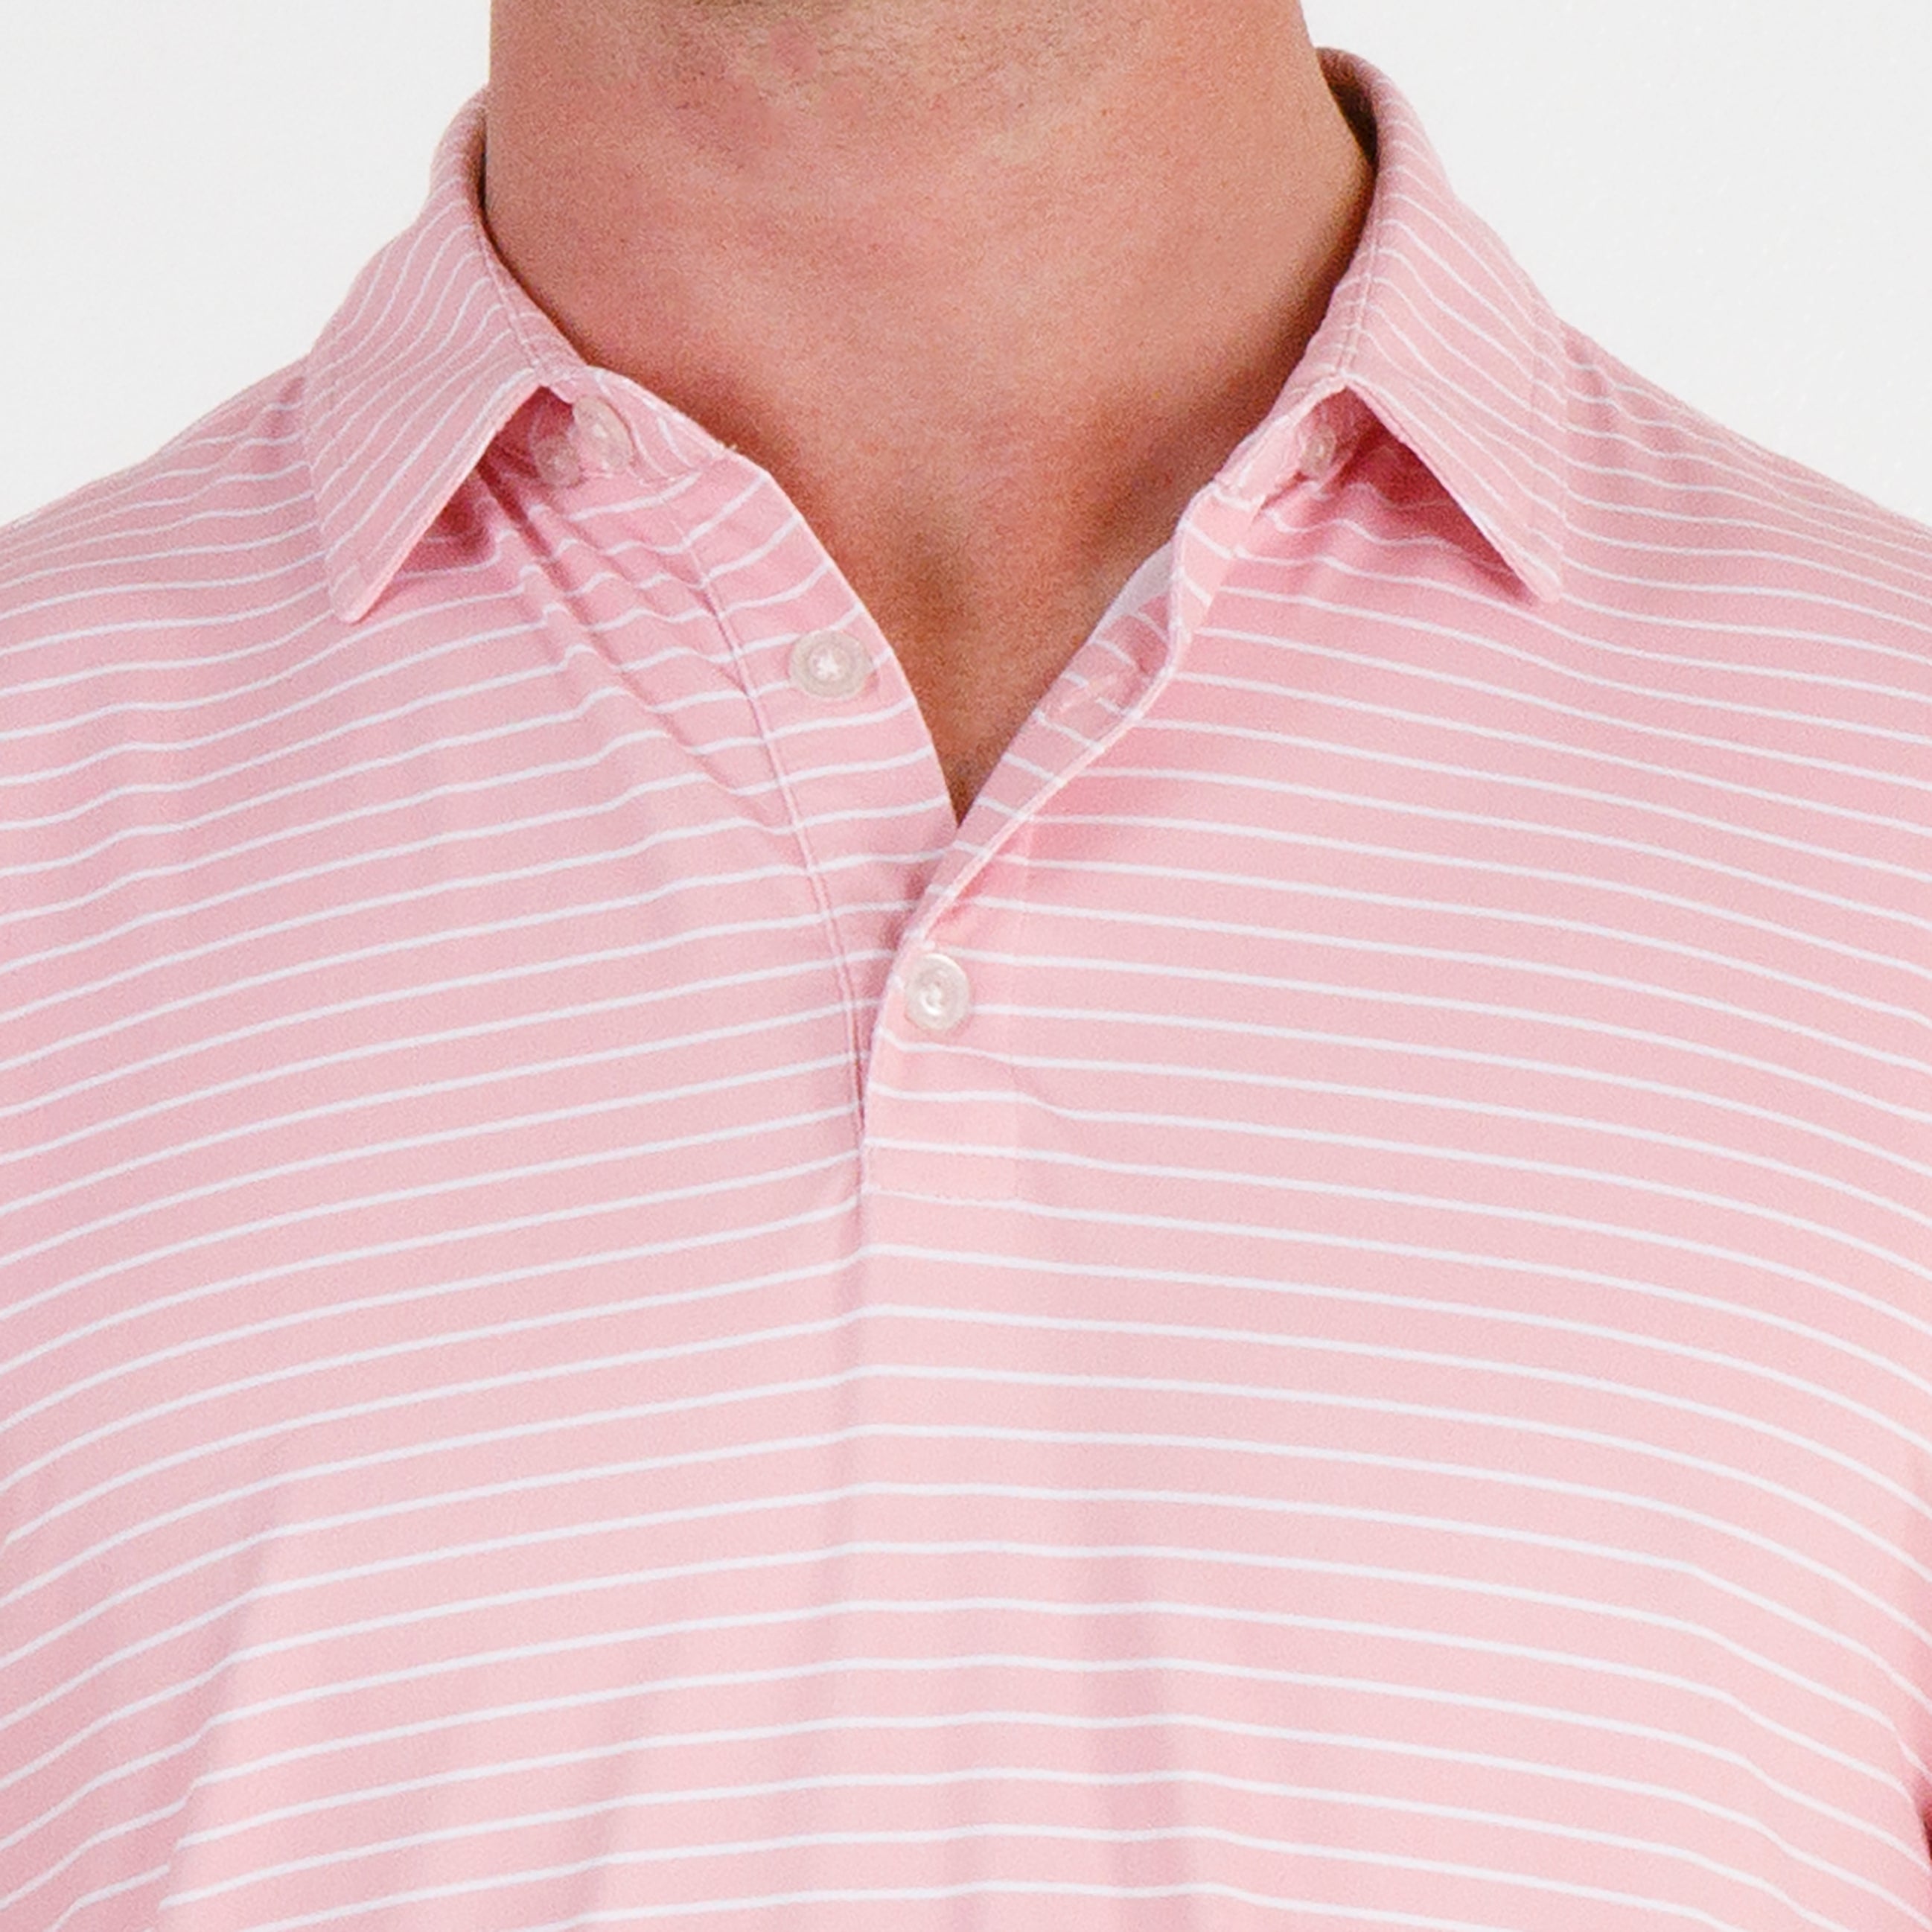 FLOW POLO - ORCHID PINK